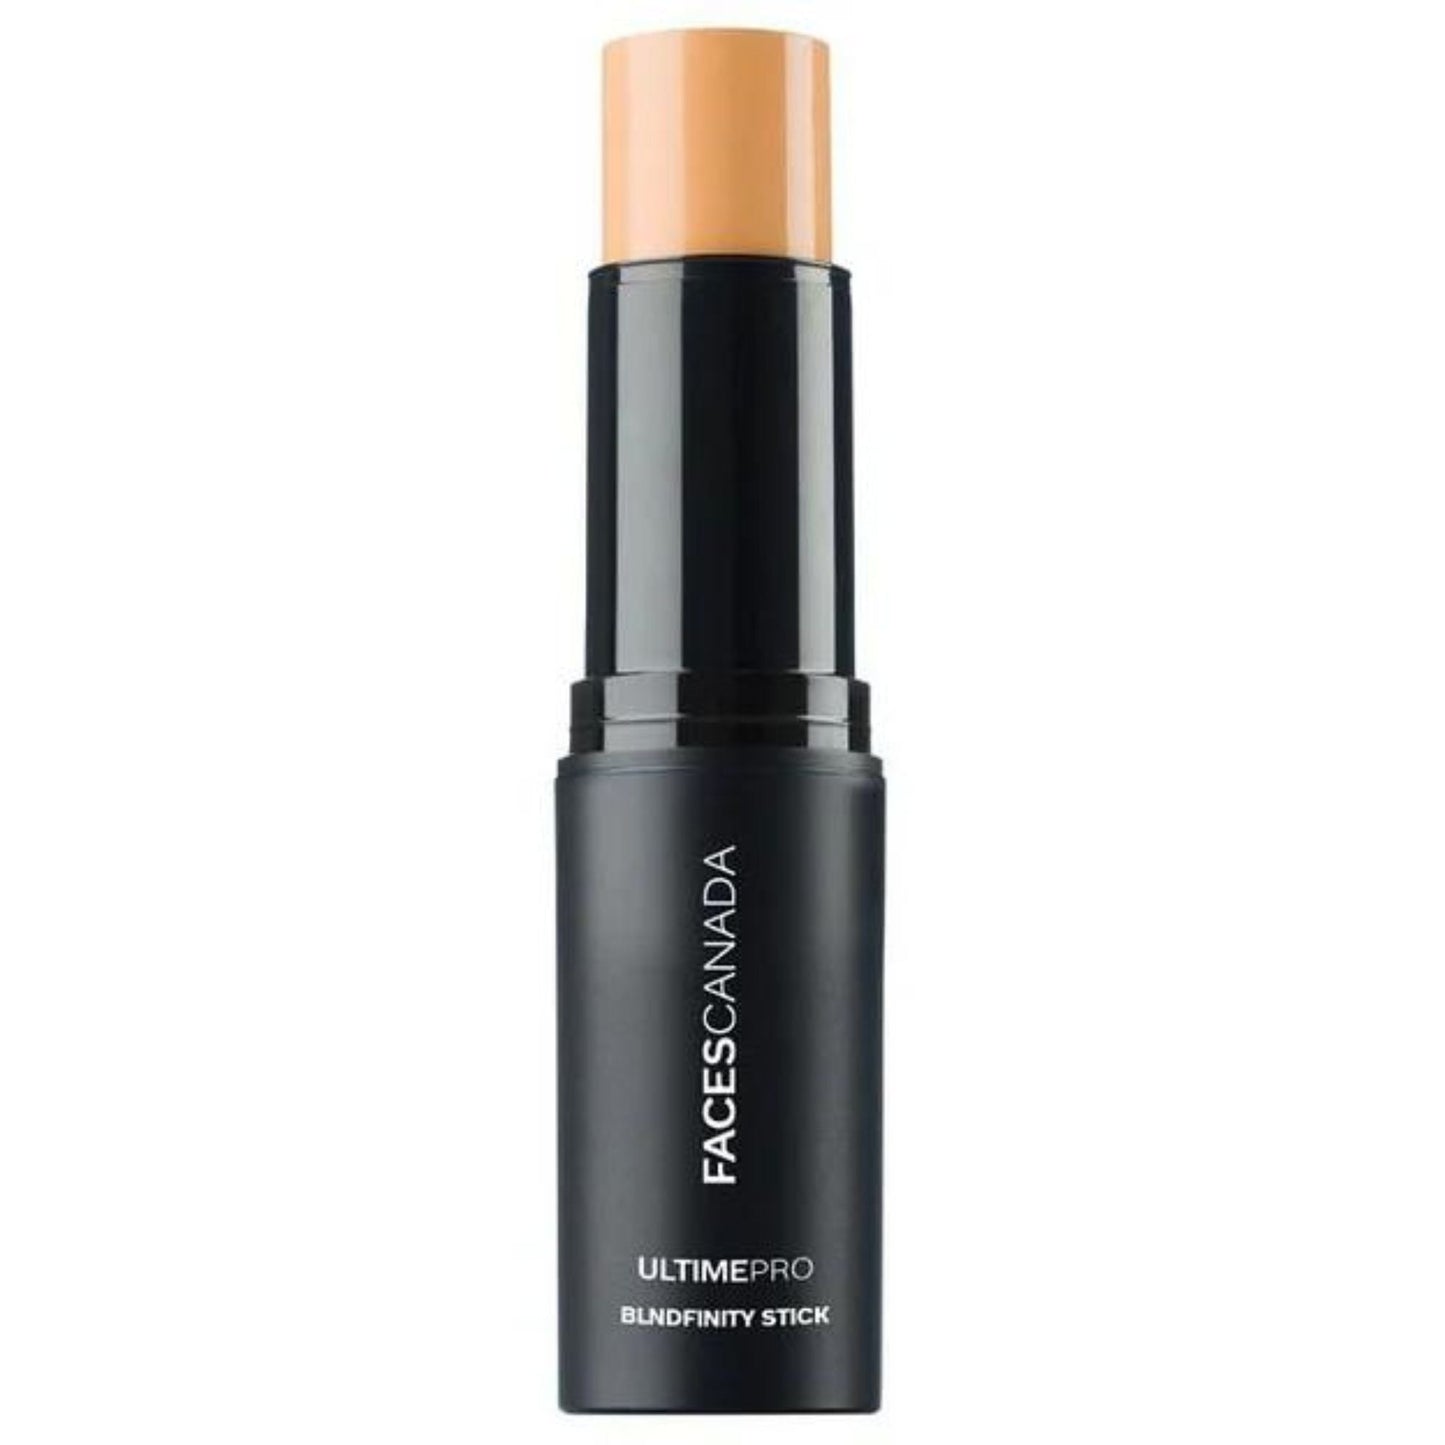 Faces Canada Sand 04 Ultime Pro Blendfinity Stick Foundation 10gm